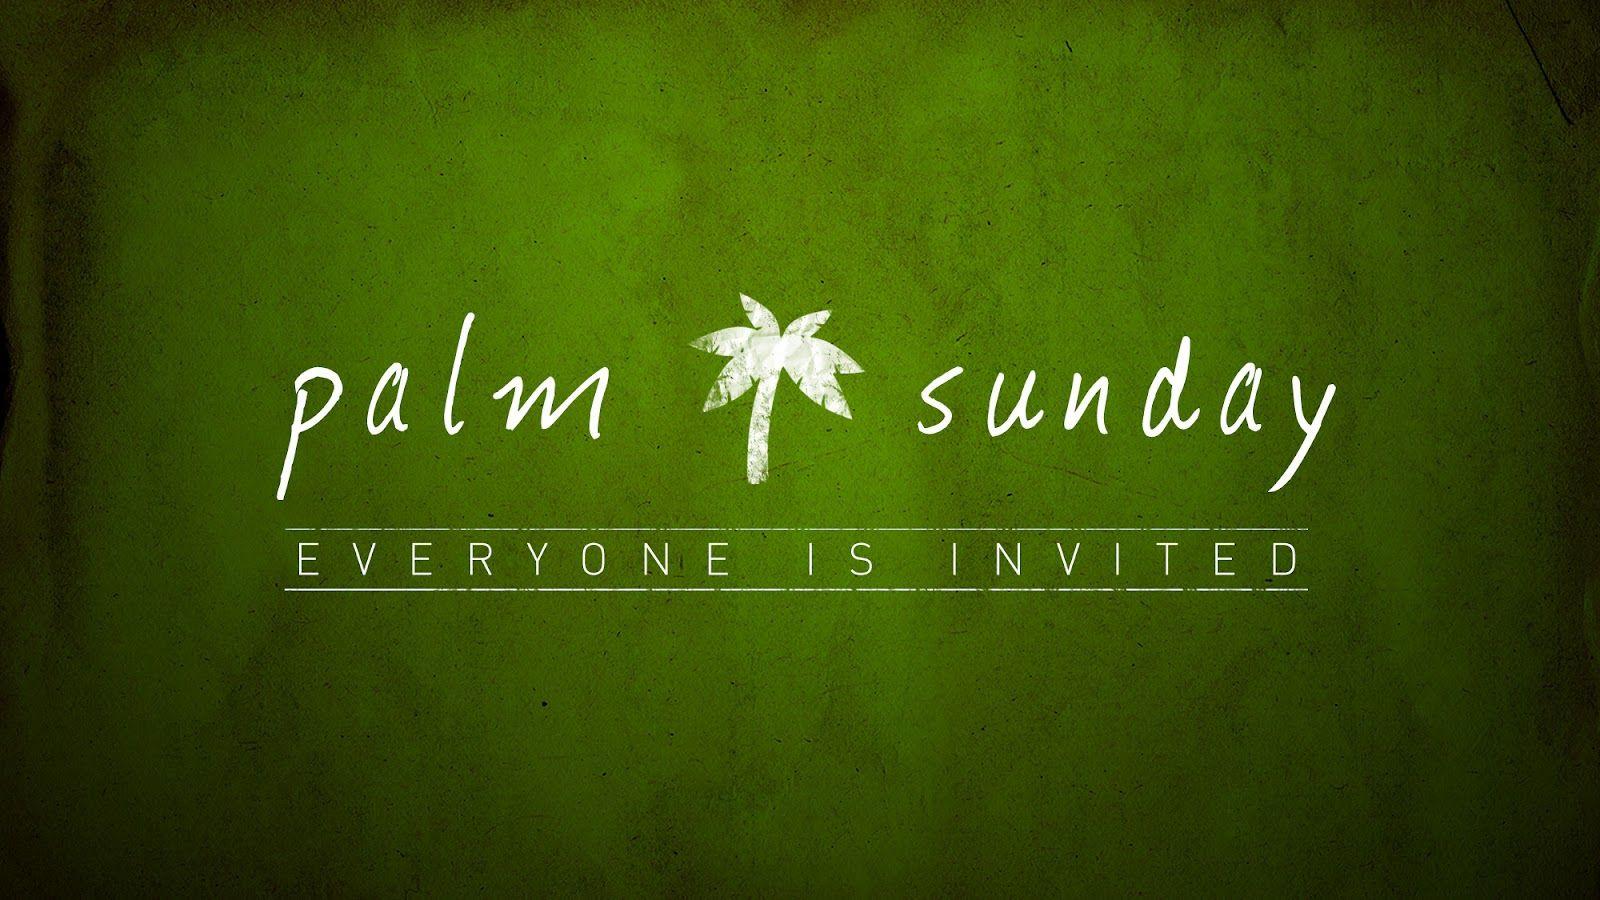 Palm Sunday HD Wallpaper and Image Download Free